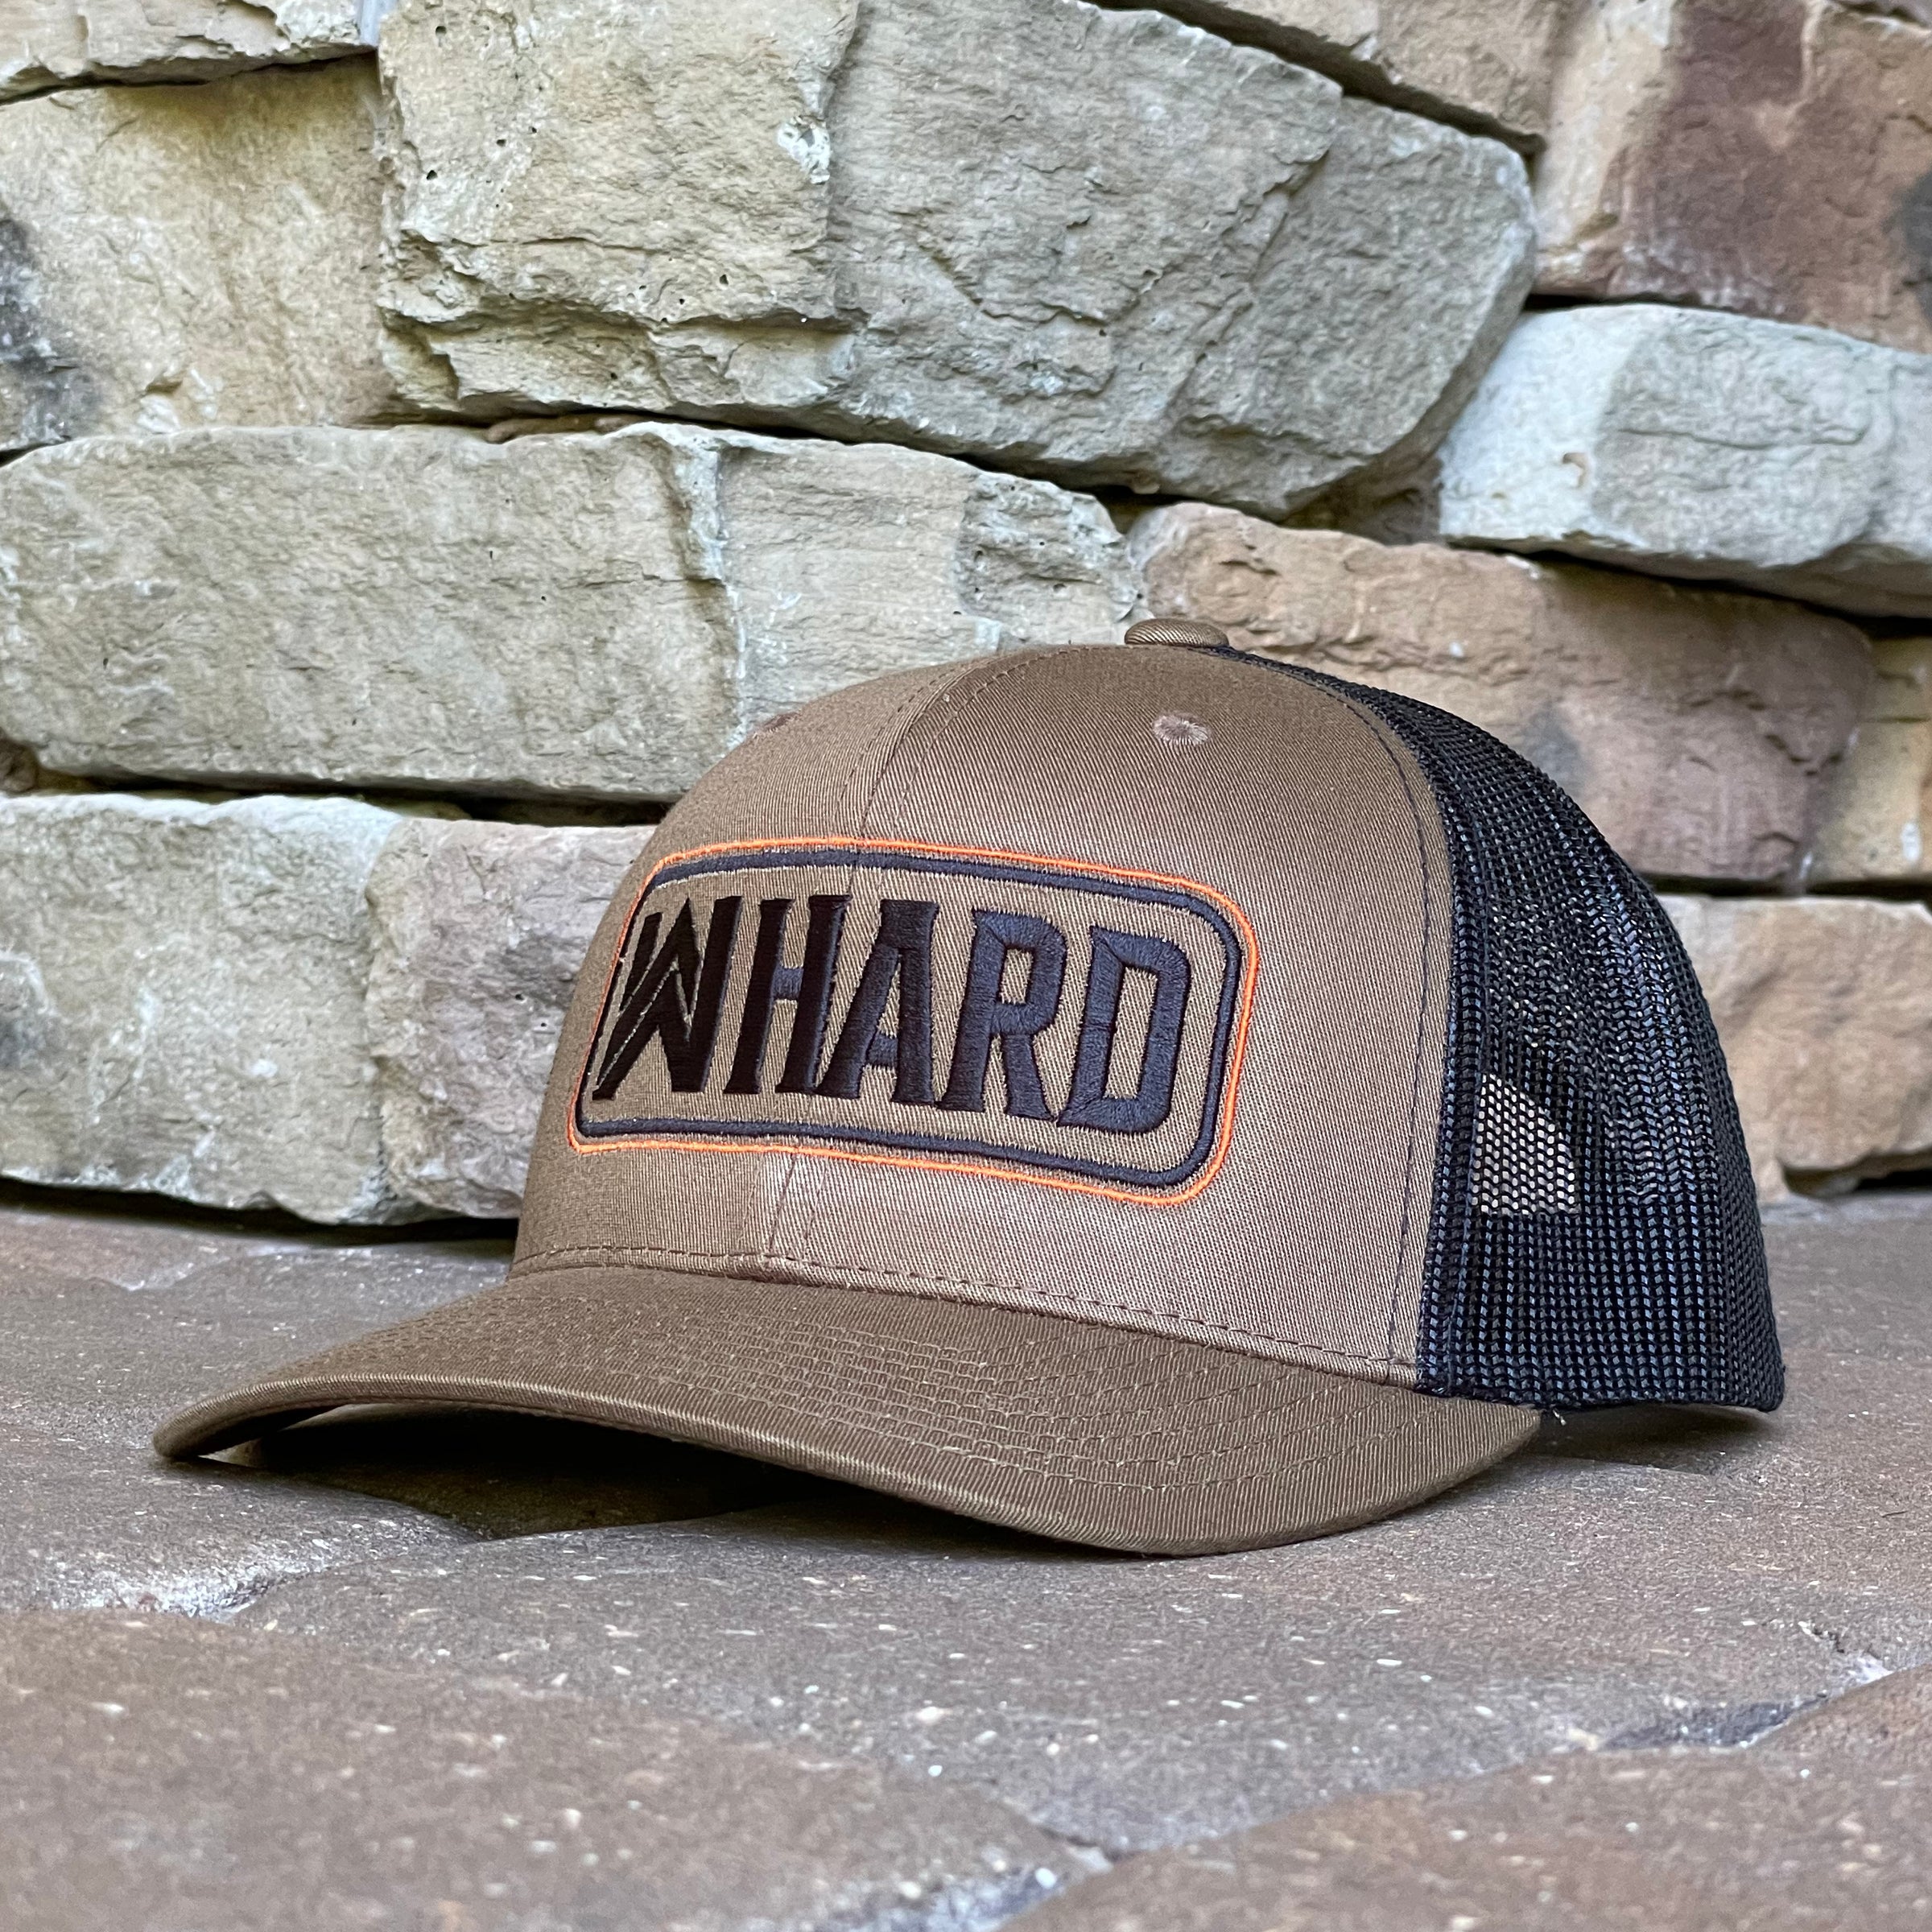 Front left view of a Coyote Brown and Black Retro Trucker hat. Embroidered with WW HARD "patch" style across the front (WW HARD icon/text in black thread, outer outline in orange thread, inner outline in black thread). Front 2 panels and bill are coyote brown, side/back mesh panels are black. Pictured on a brown stone/paver background.